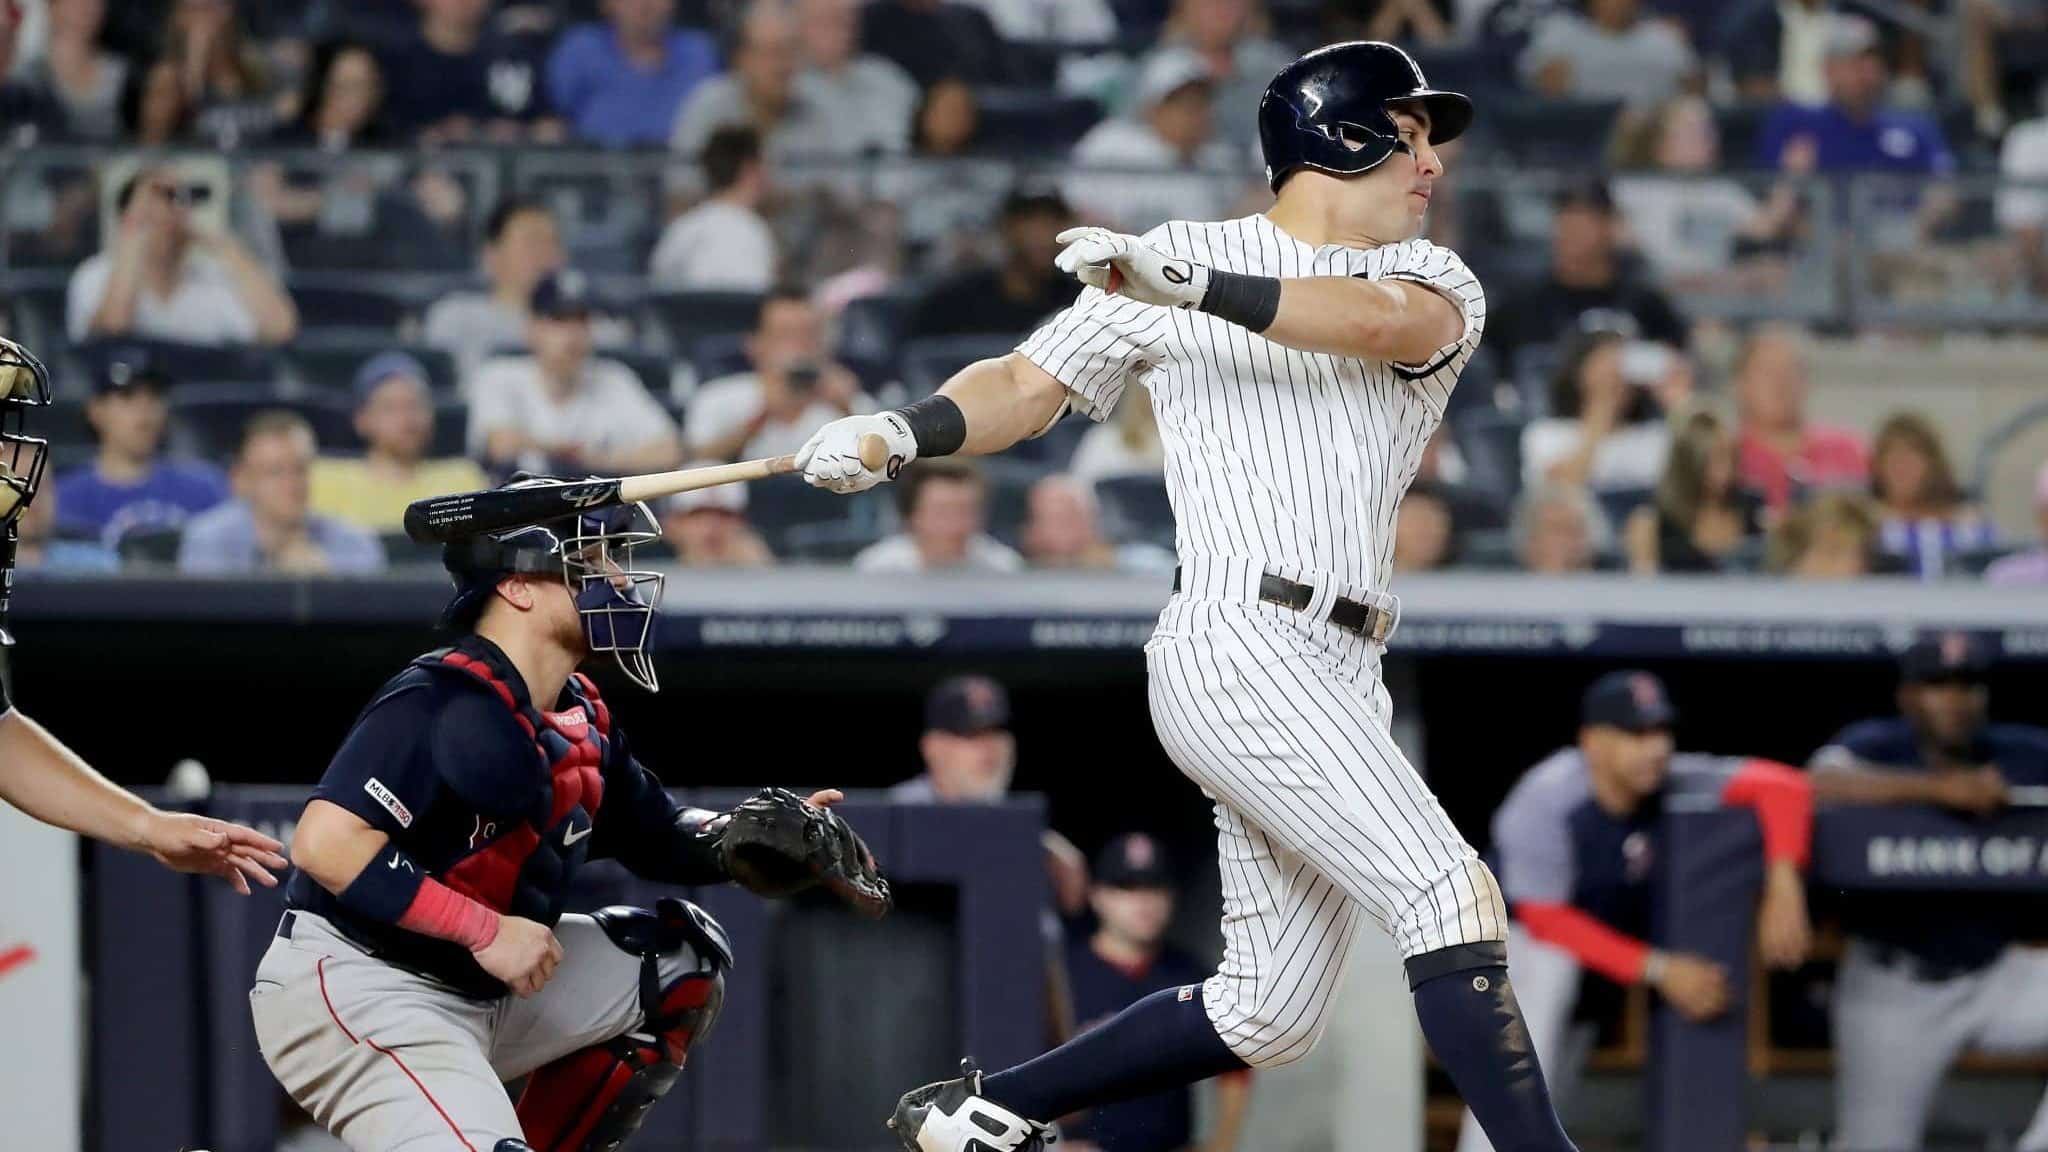 NEW YORK, NEW YORK - AUGUST 03: Mike Tauchman #39 of the New York Yankees hits a 2 RBI single in the seventh inning as Christian Vazquez #7 of the Boston Red Sox defends during game two of a double header at Yankee Stadium on August 03, 2019 in New York City.